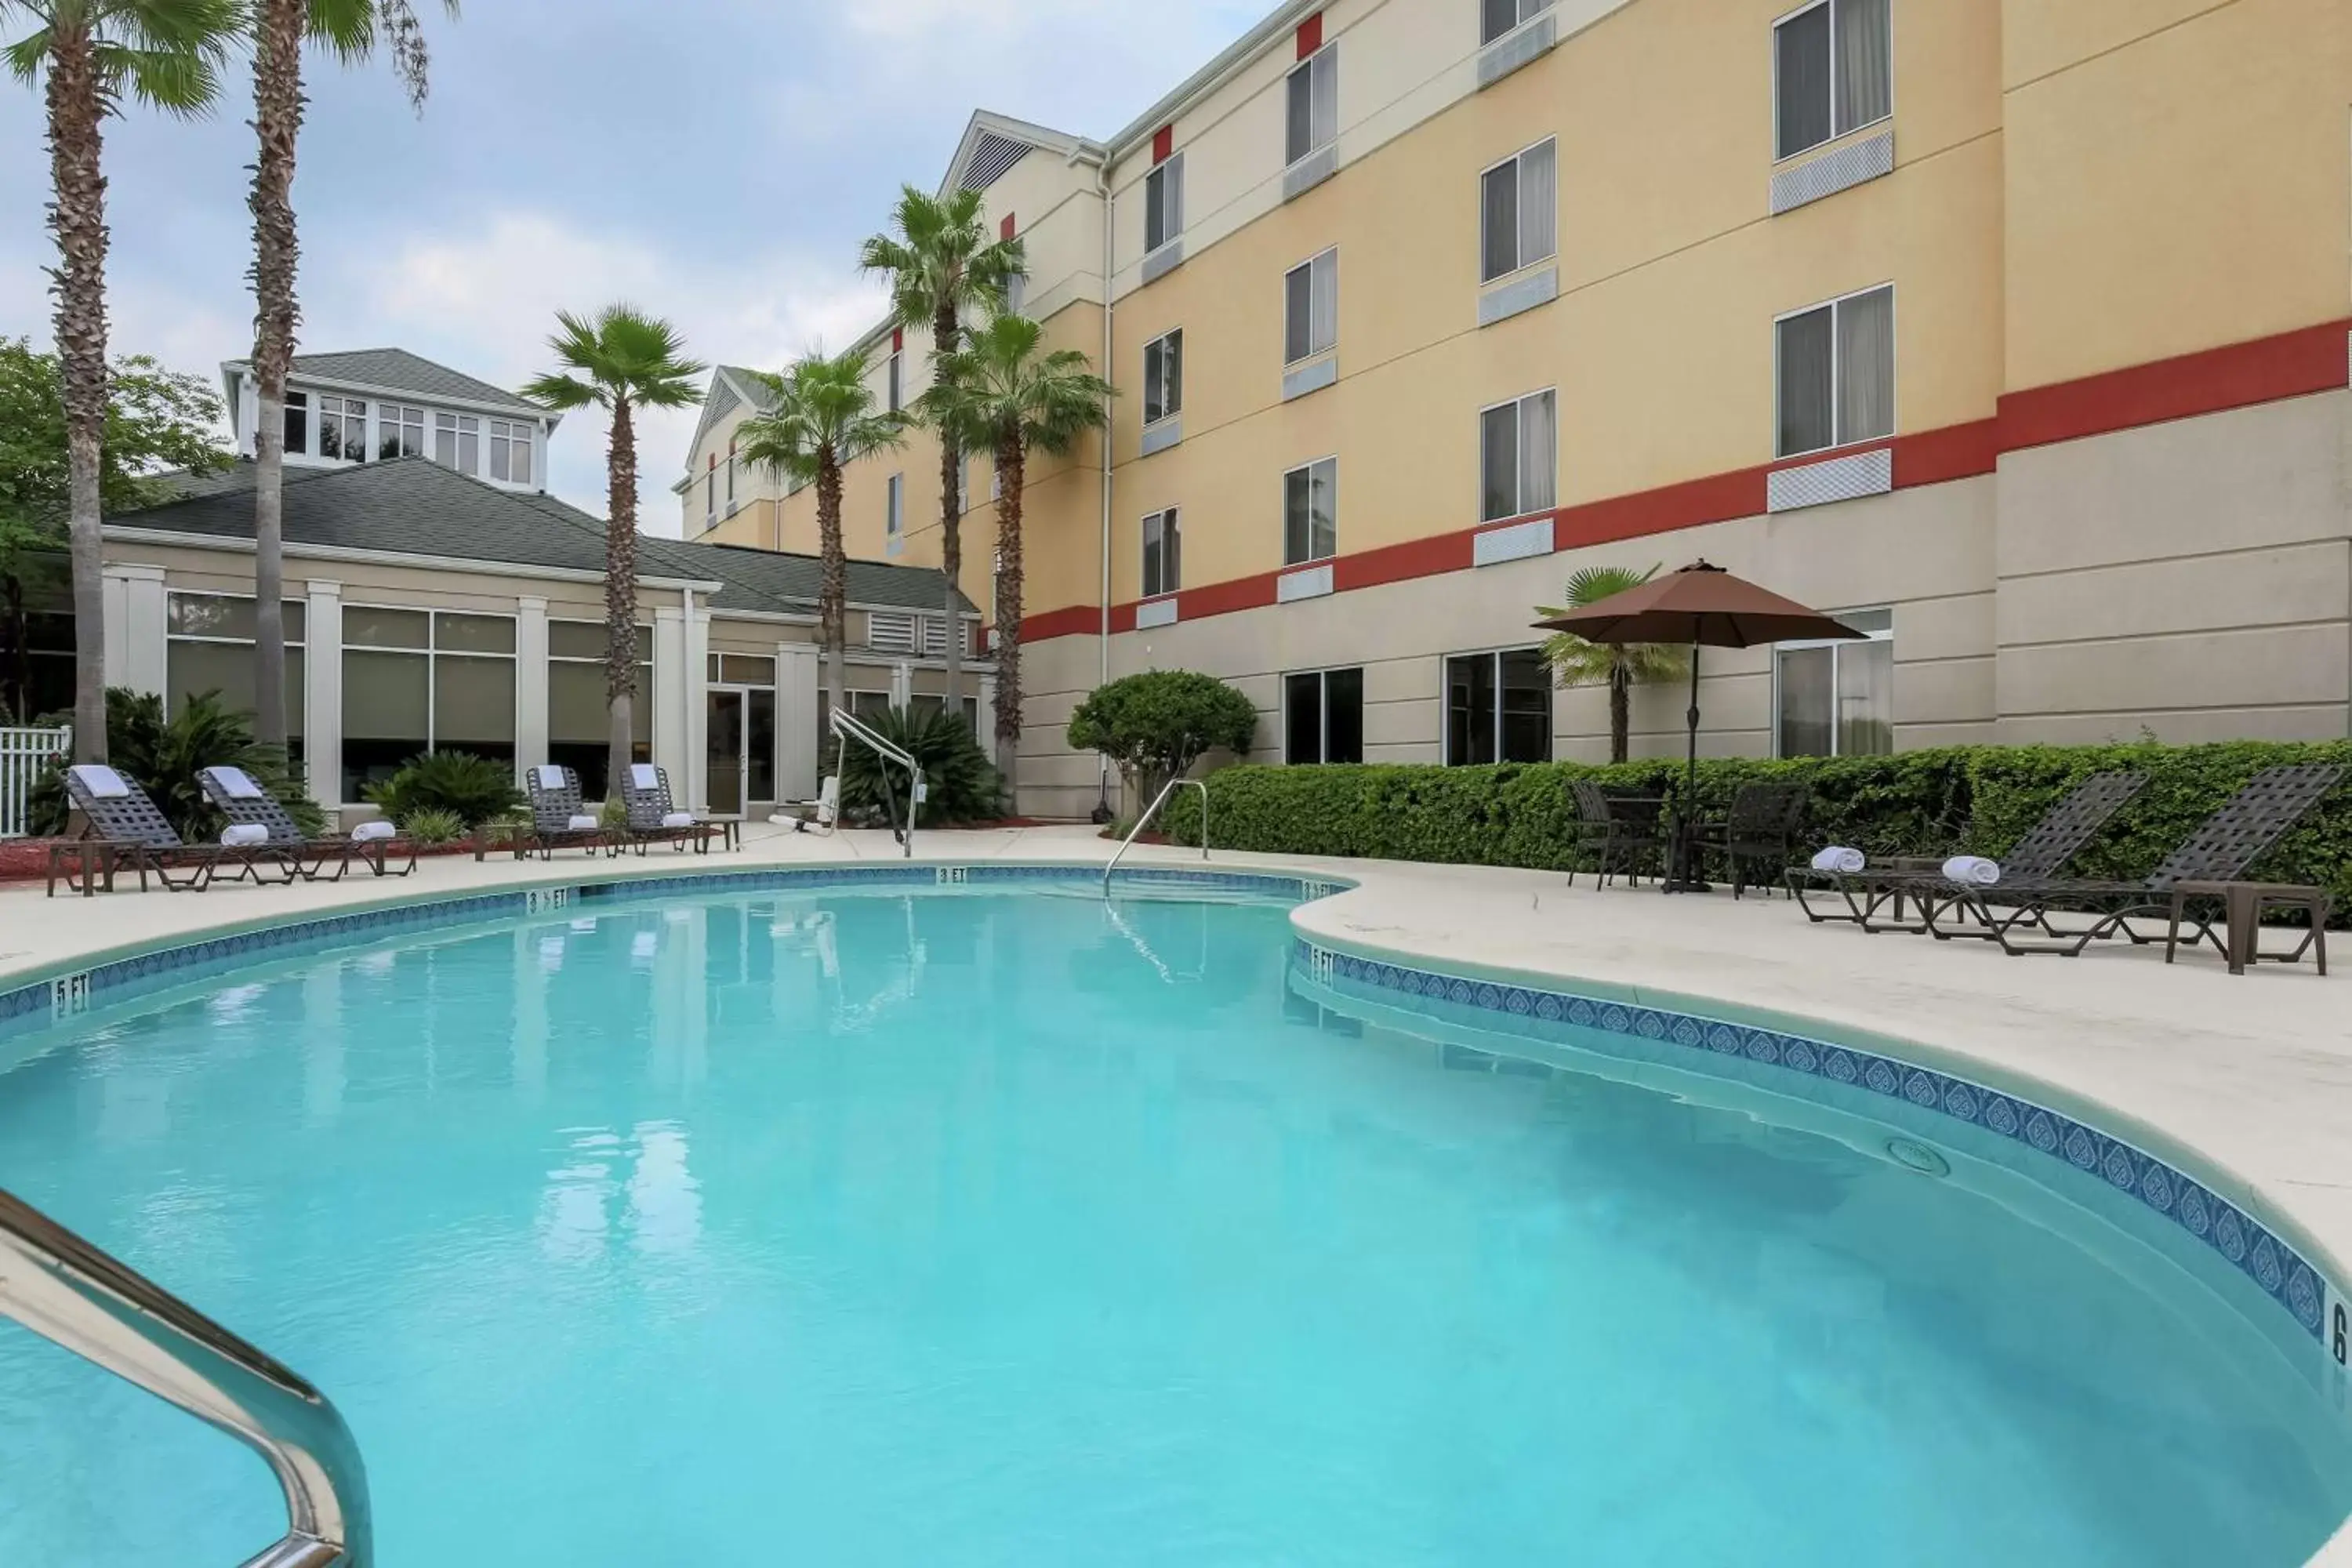 Pool view, Property Building in Hilton Garden Inn Tallahassee